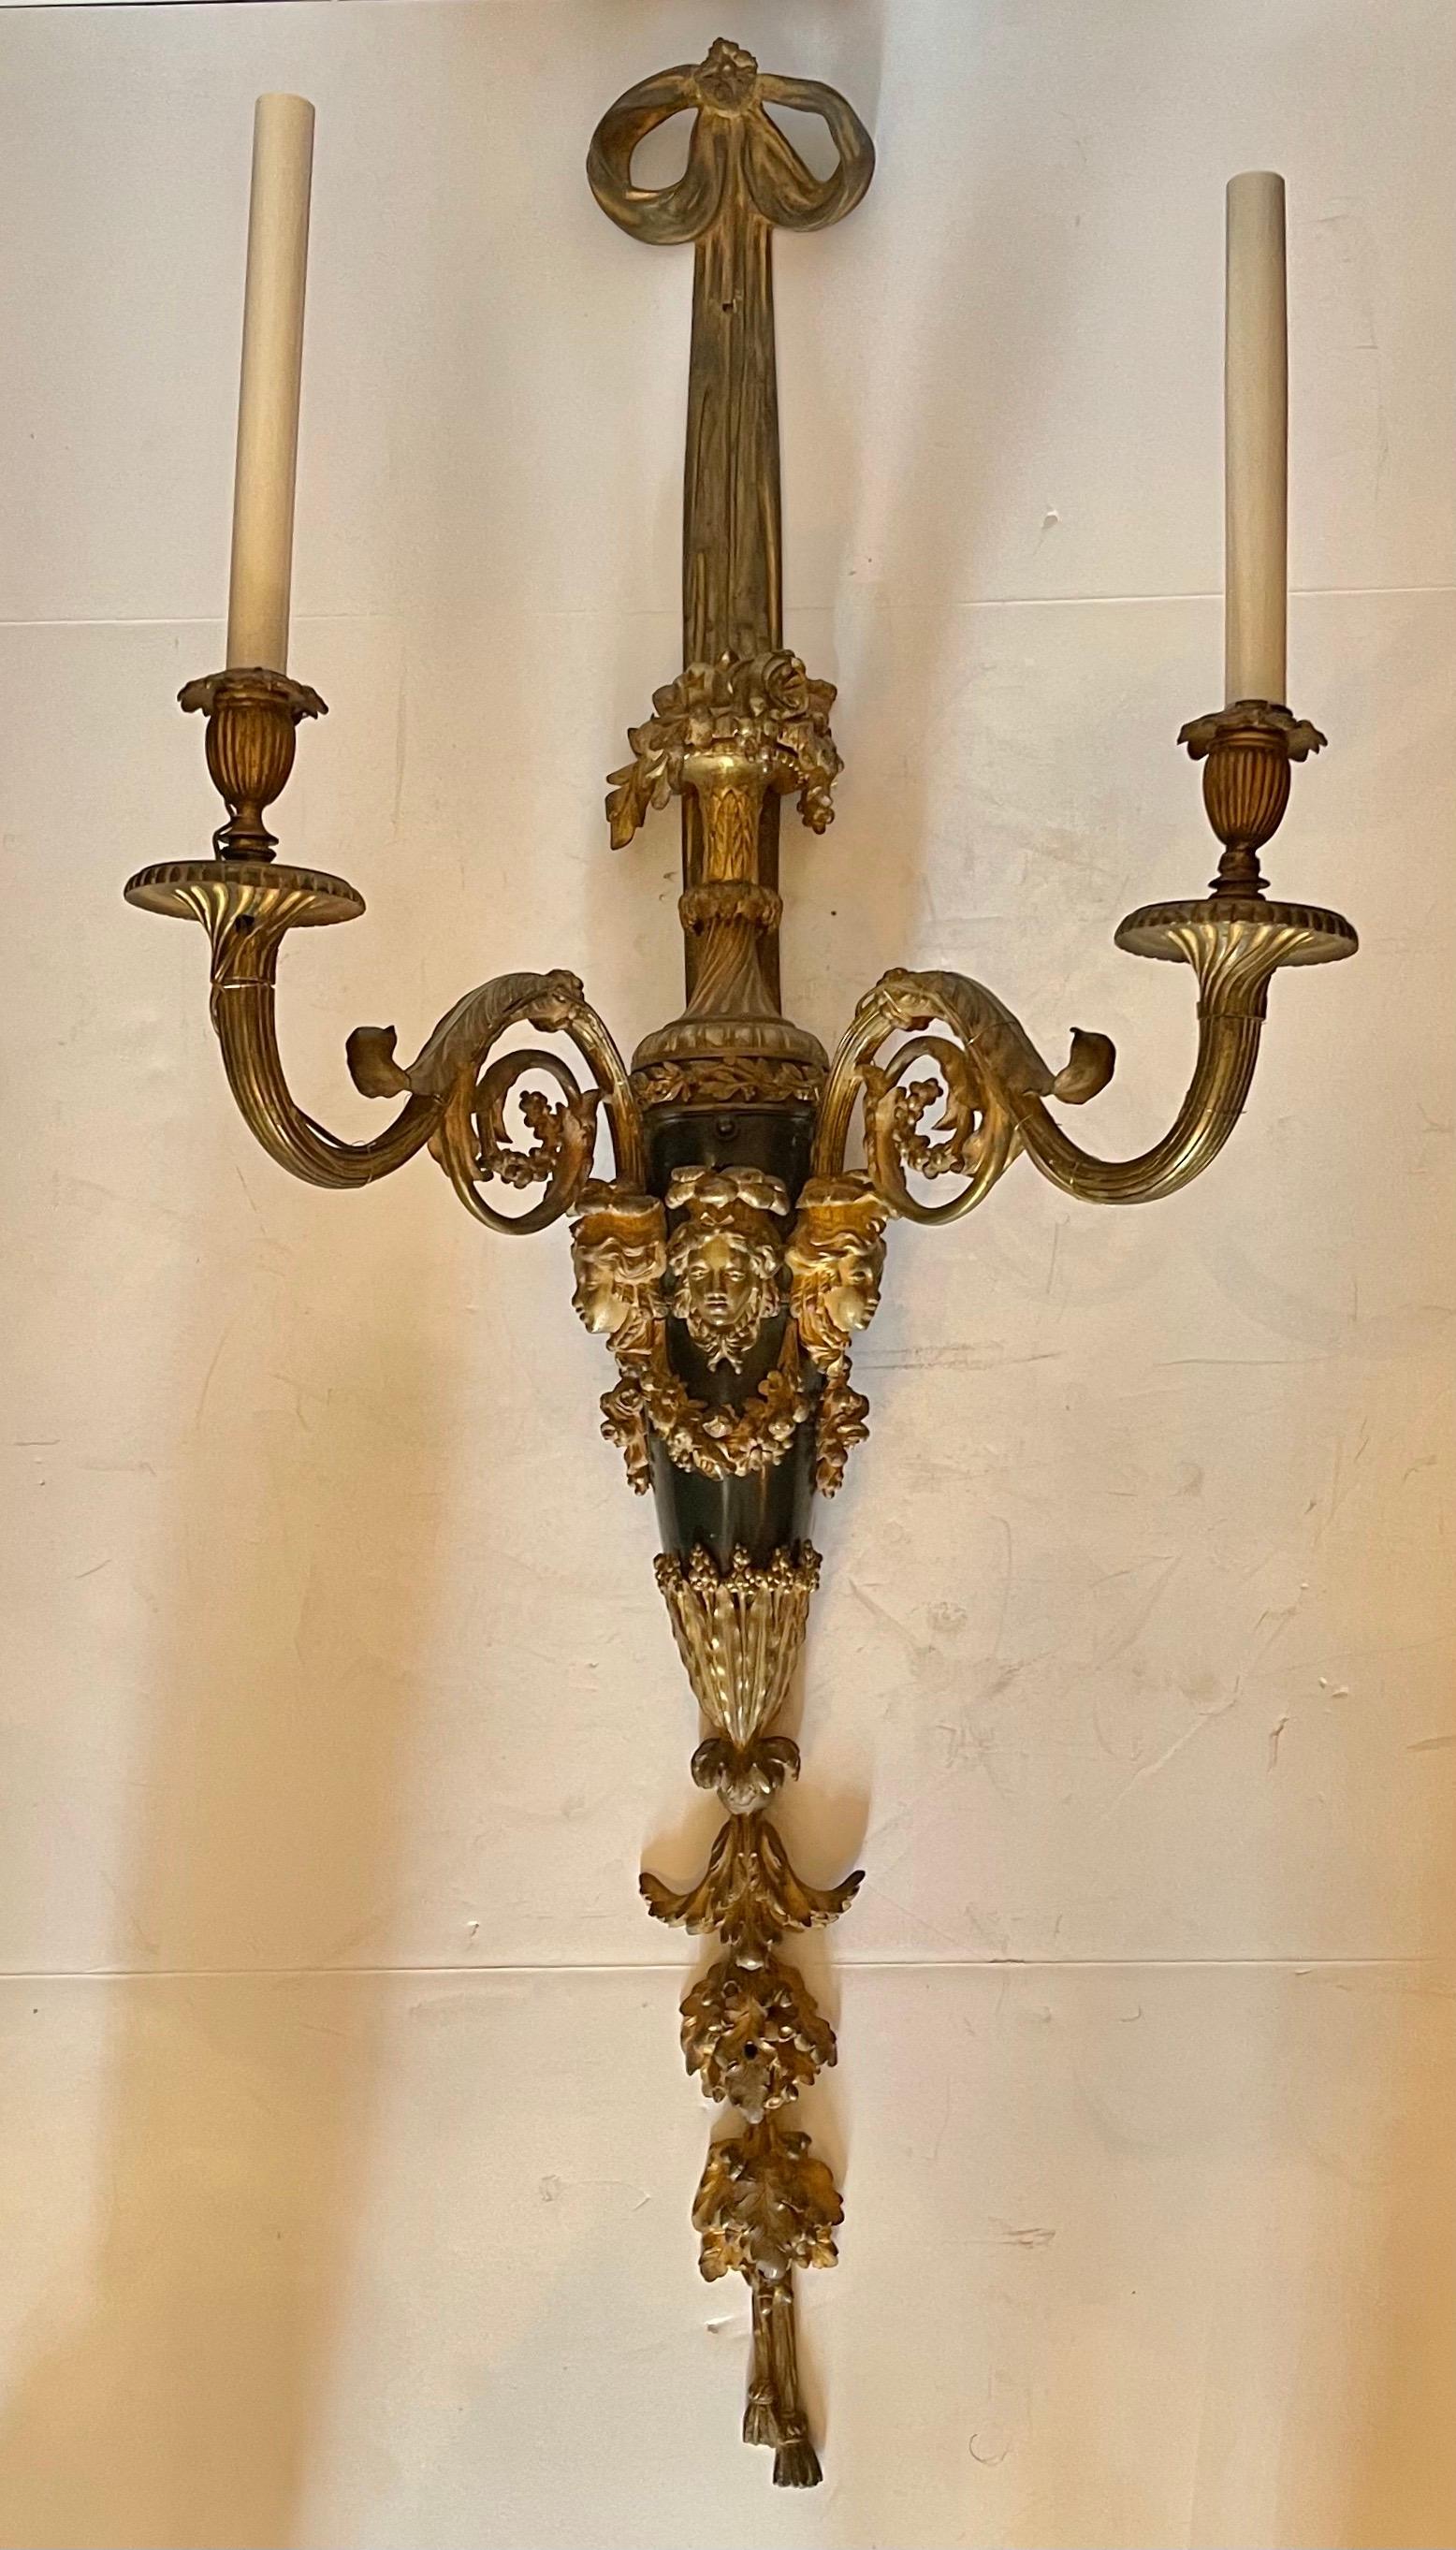 Wonderful pair of gilt and patinated bronze sconces beautifully designed in Louis XVI style. These monumental size and opulent sconces, have 2 candelabra lights each with composed twisted flutes, acanthus and bunches of fruits. The stem is adorned